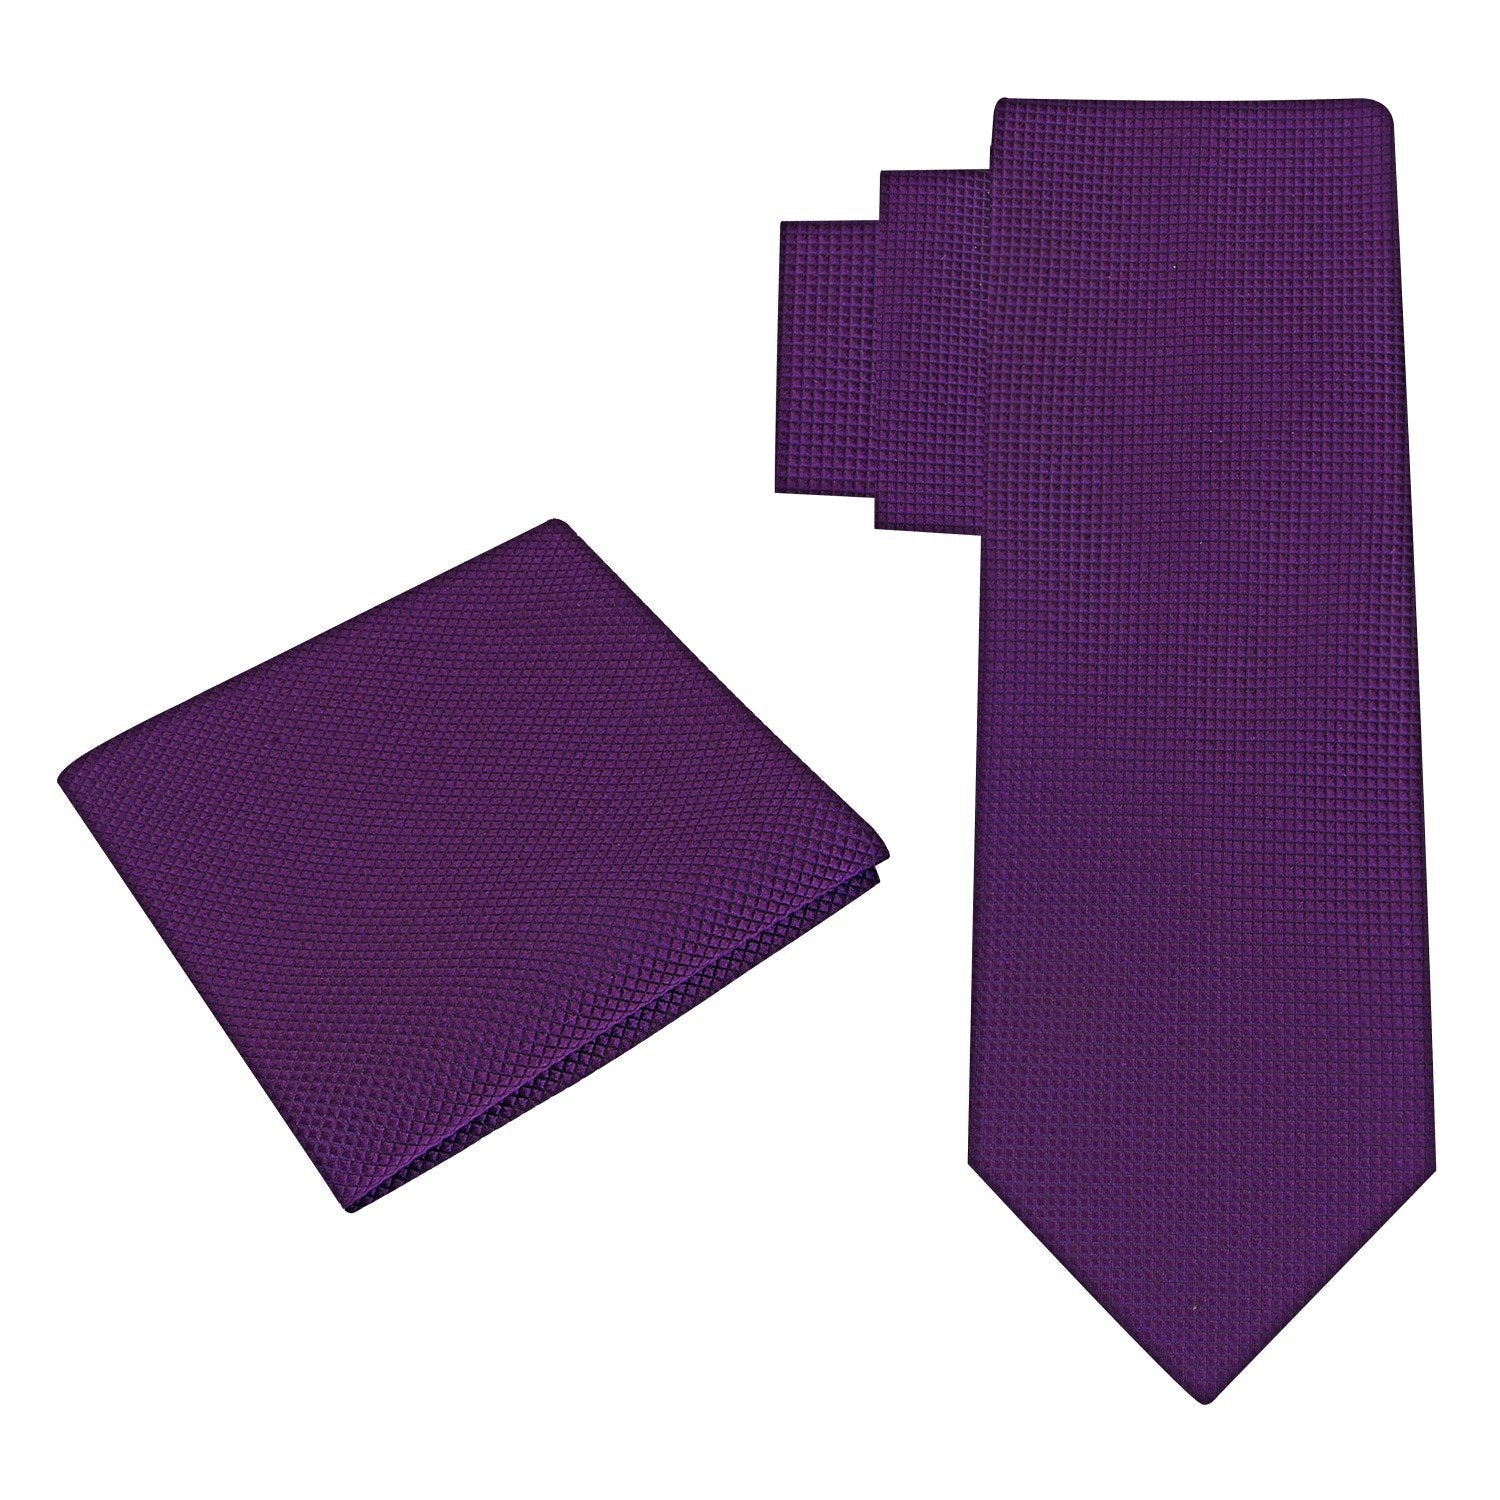 Alt View: A Solid Deep Purple With Check Texture Pattern Silk Necktie, Matching Pocket Square